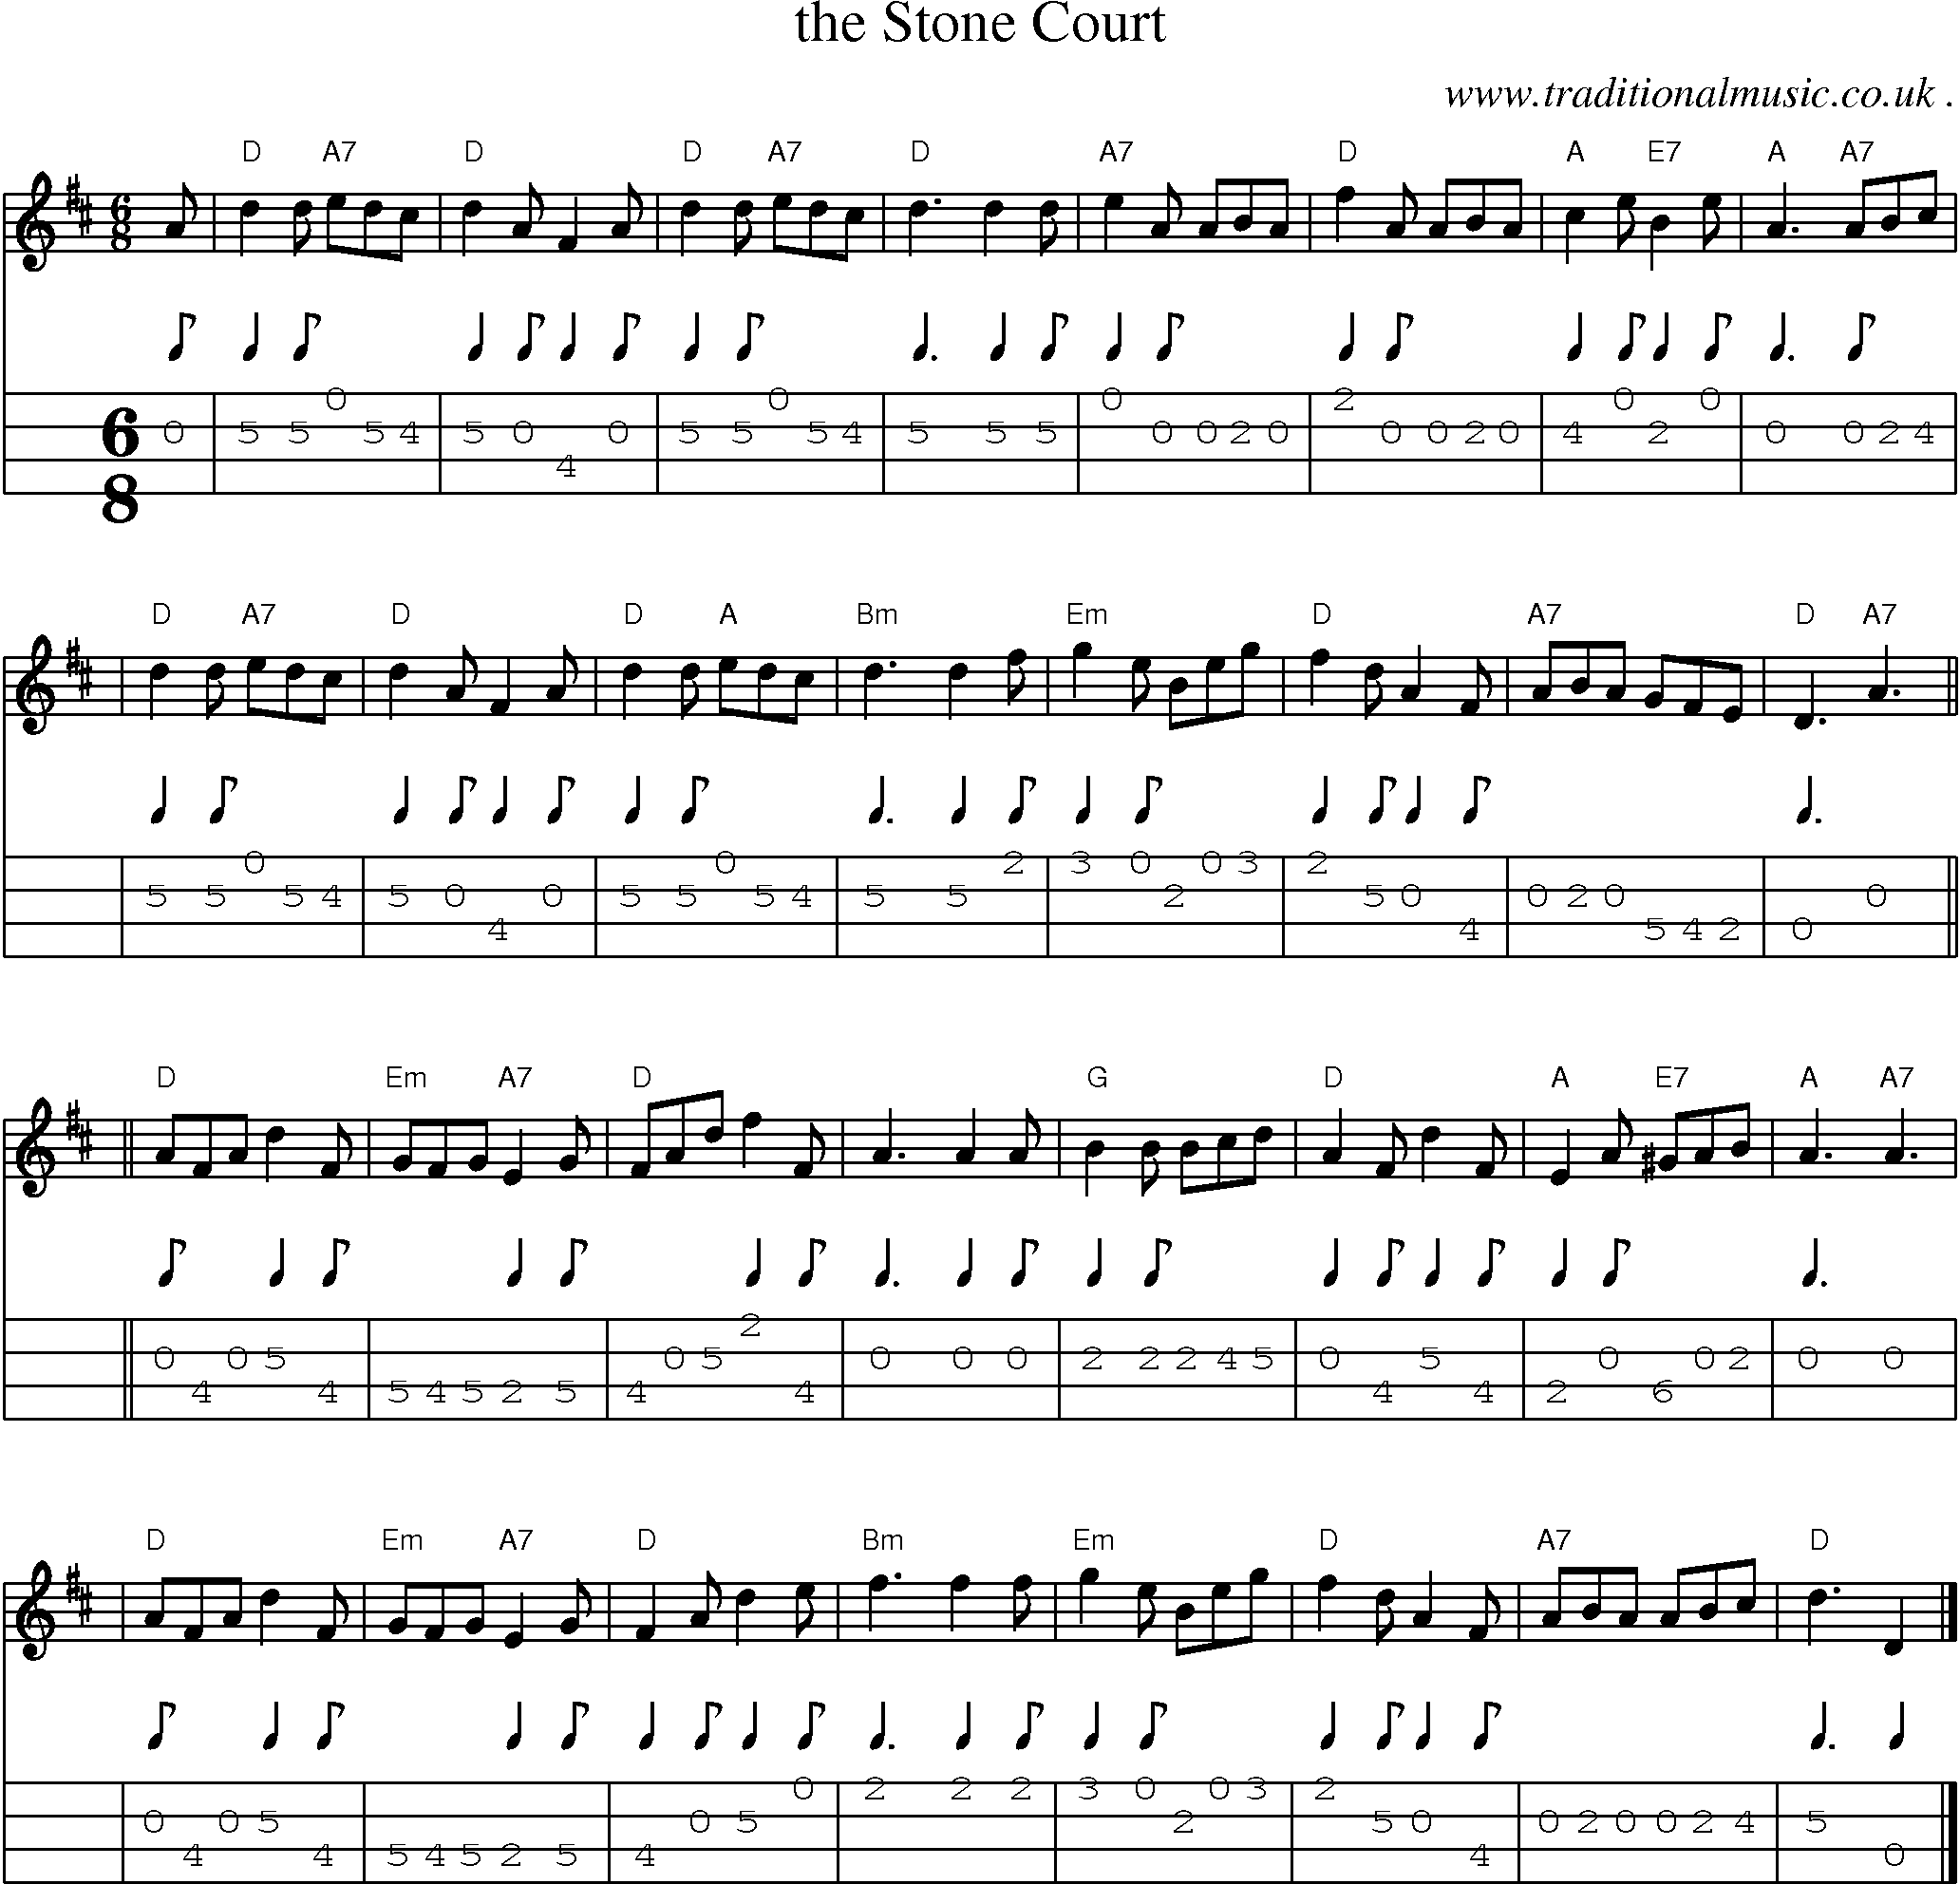 Sheet-music  score, Chords and Mandolin Tabs for The Stone Court